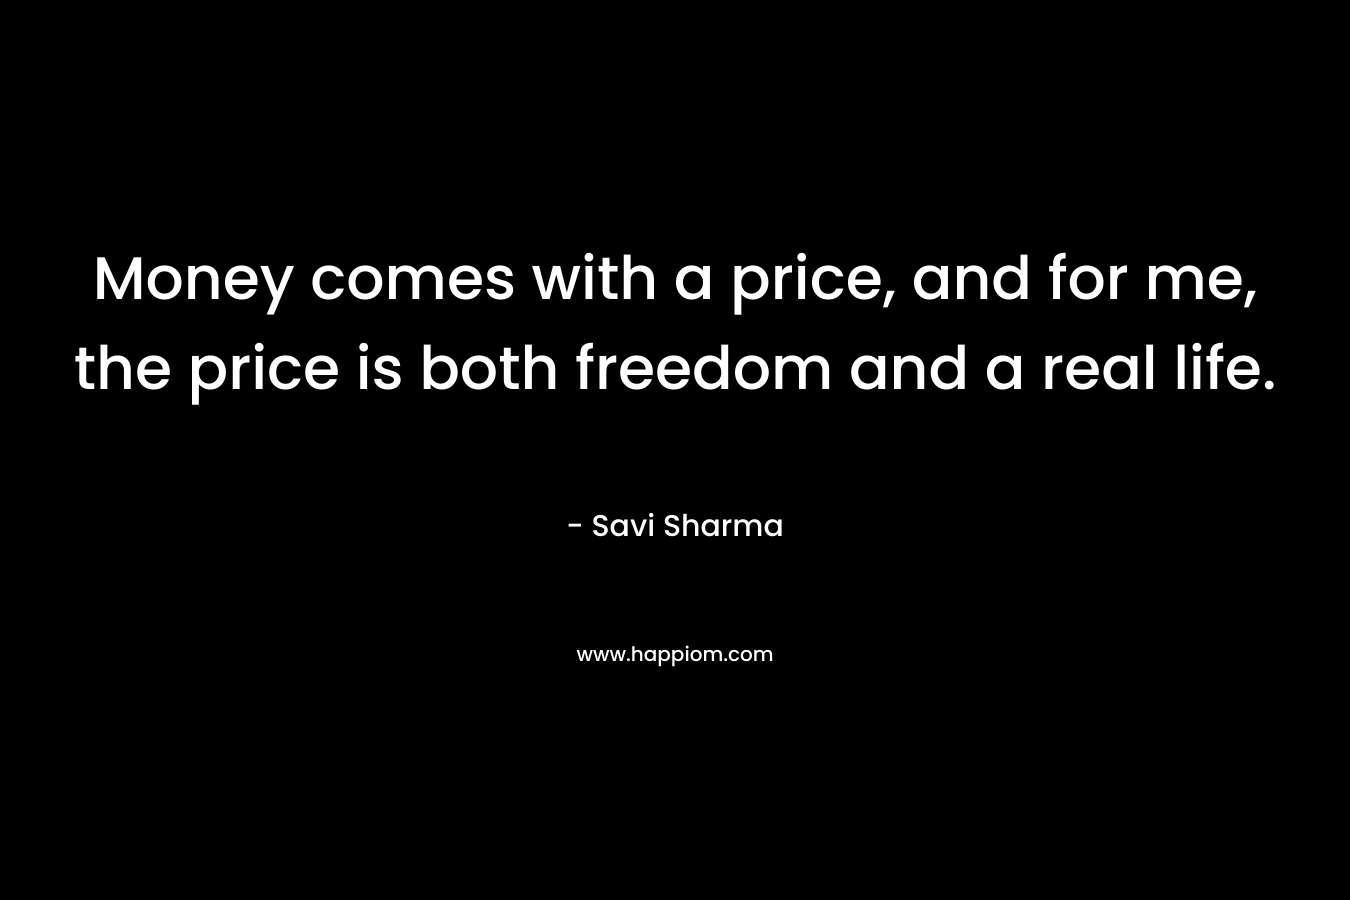 Money comes with a price, and for me, the price is both freedom and a real life.